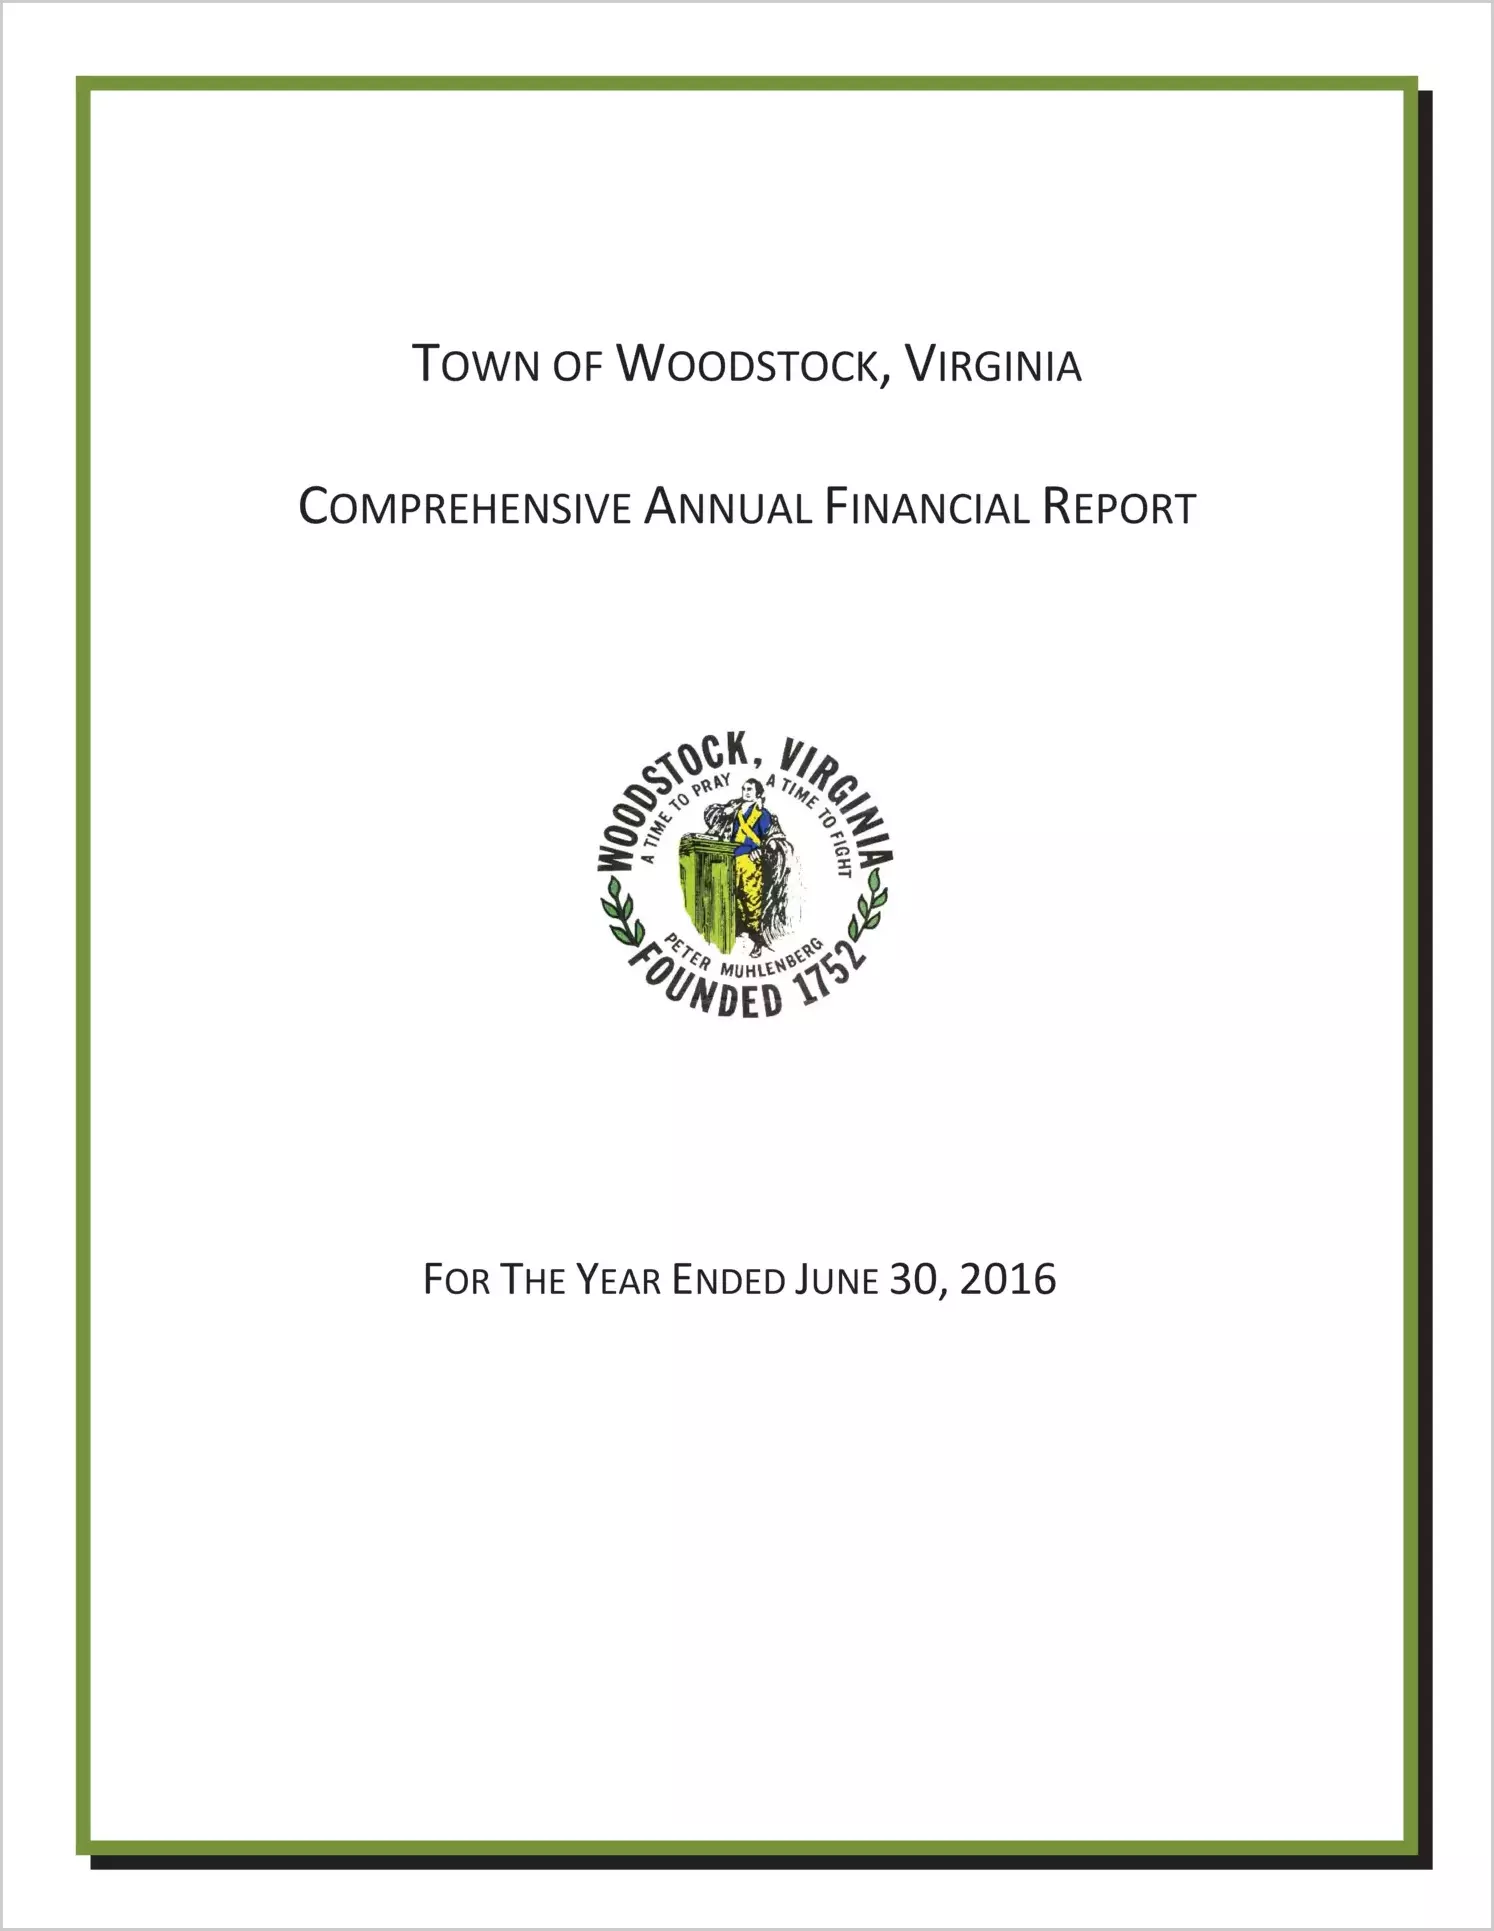 2016 Annual Financial Report for Town of Woodstock